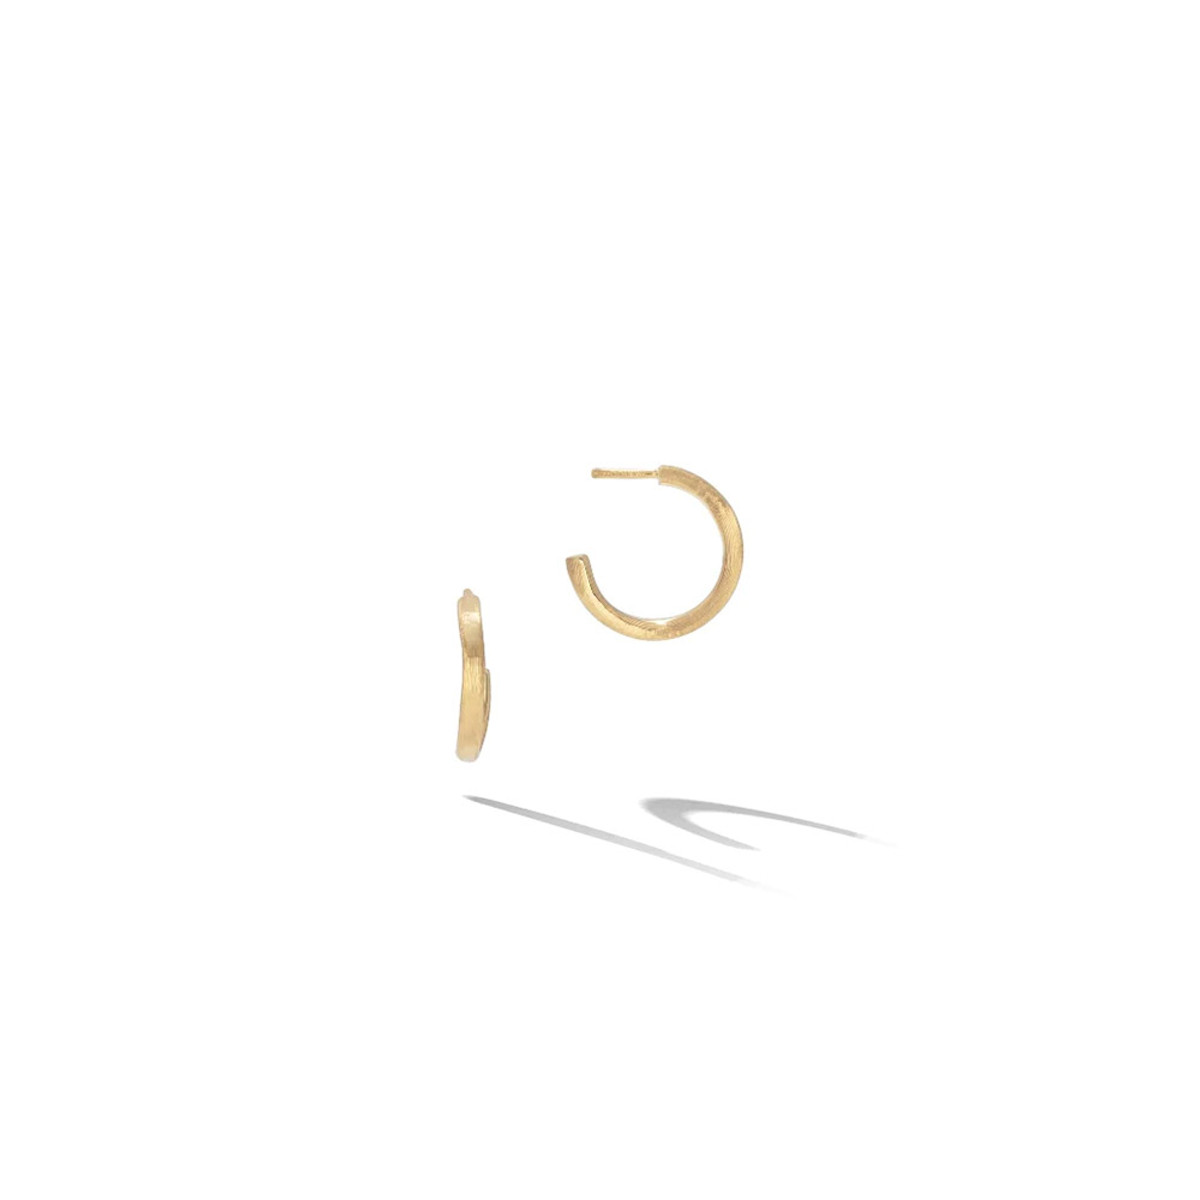 Marco Bicego Jaipur Collection 18K Yellow Gold Small Hoop Earrings-47096 Product Image